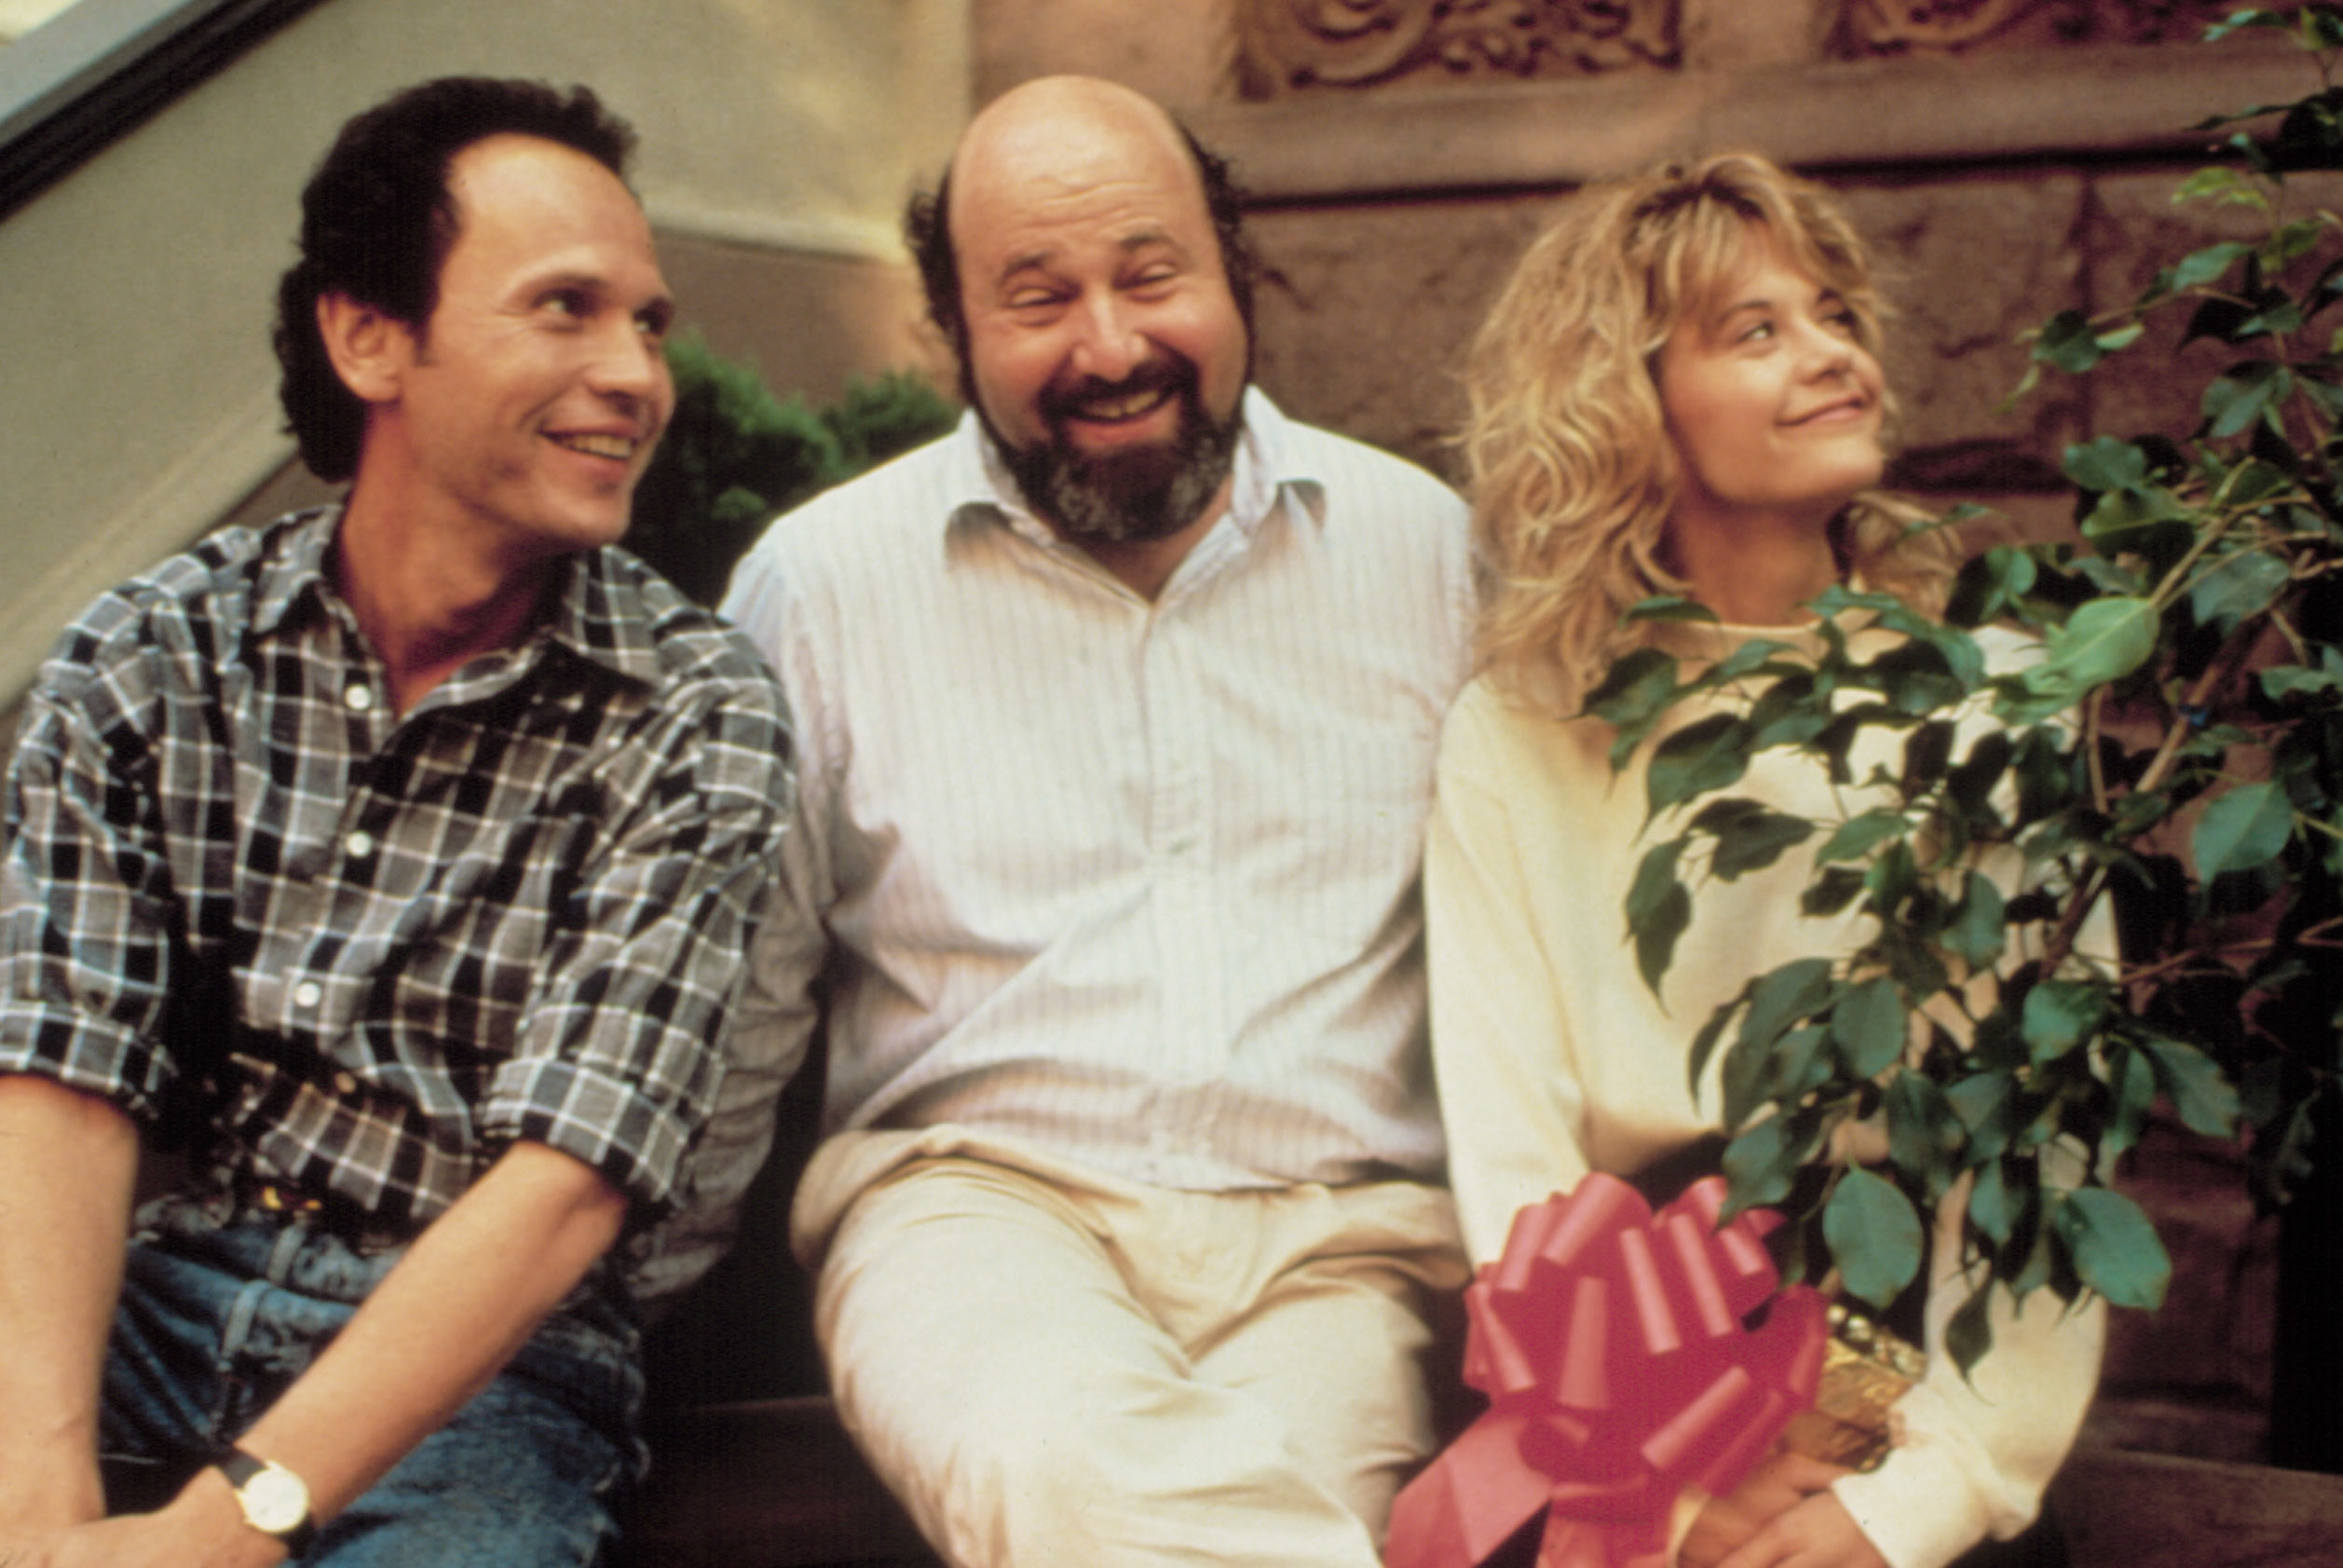 Crystal, Ryan, and Reiner on the set of &quot;When Harry Met Sally...&quot;